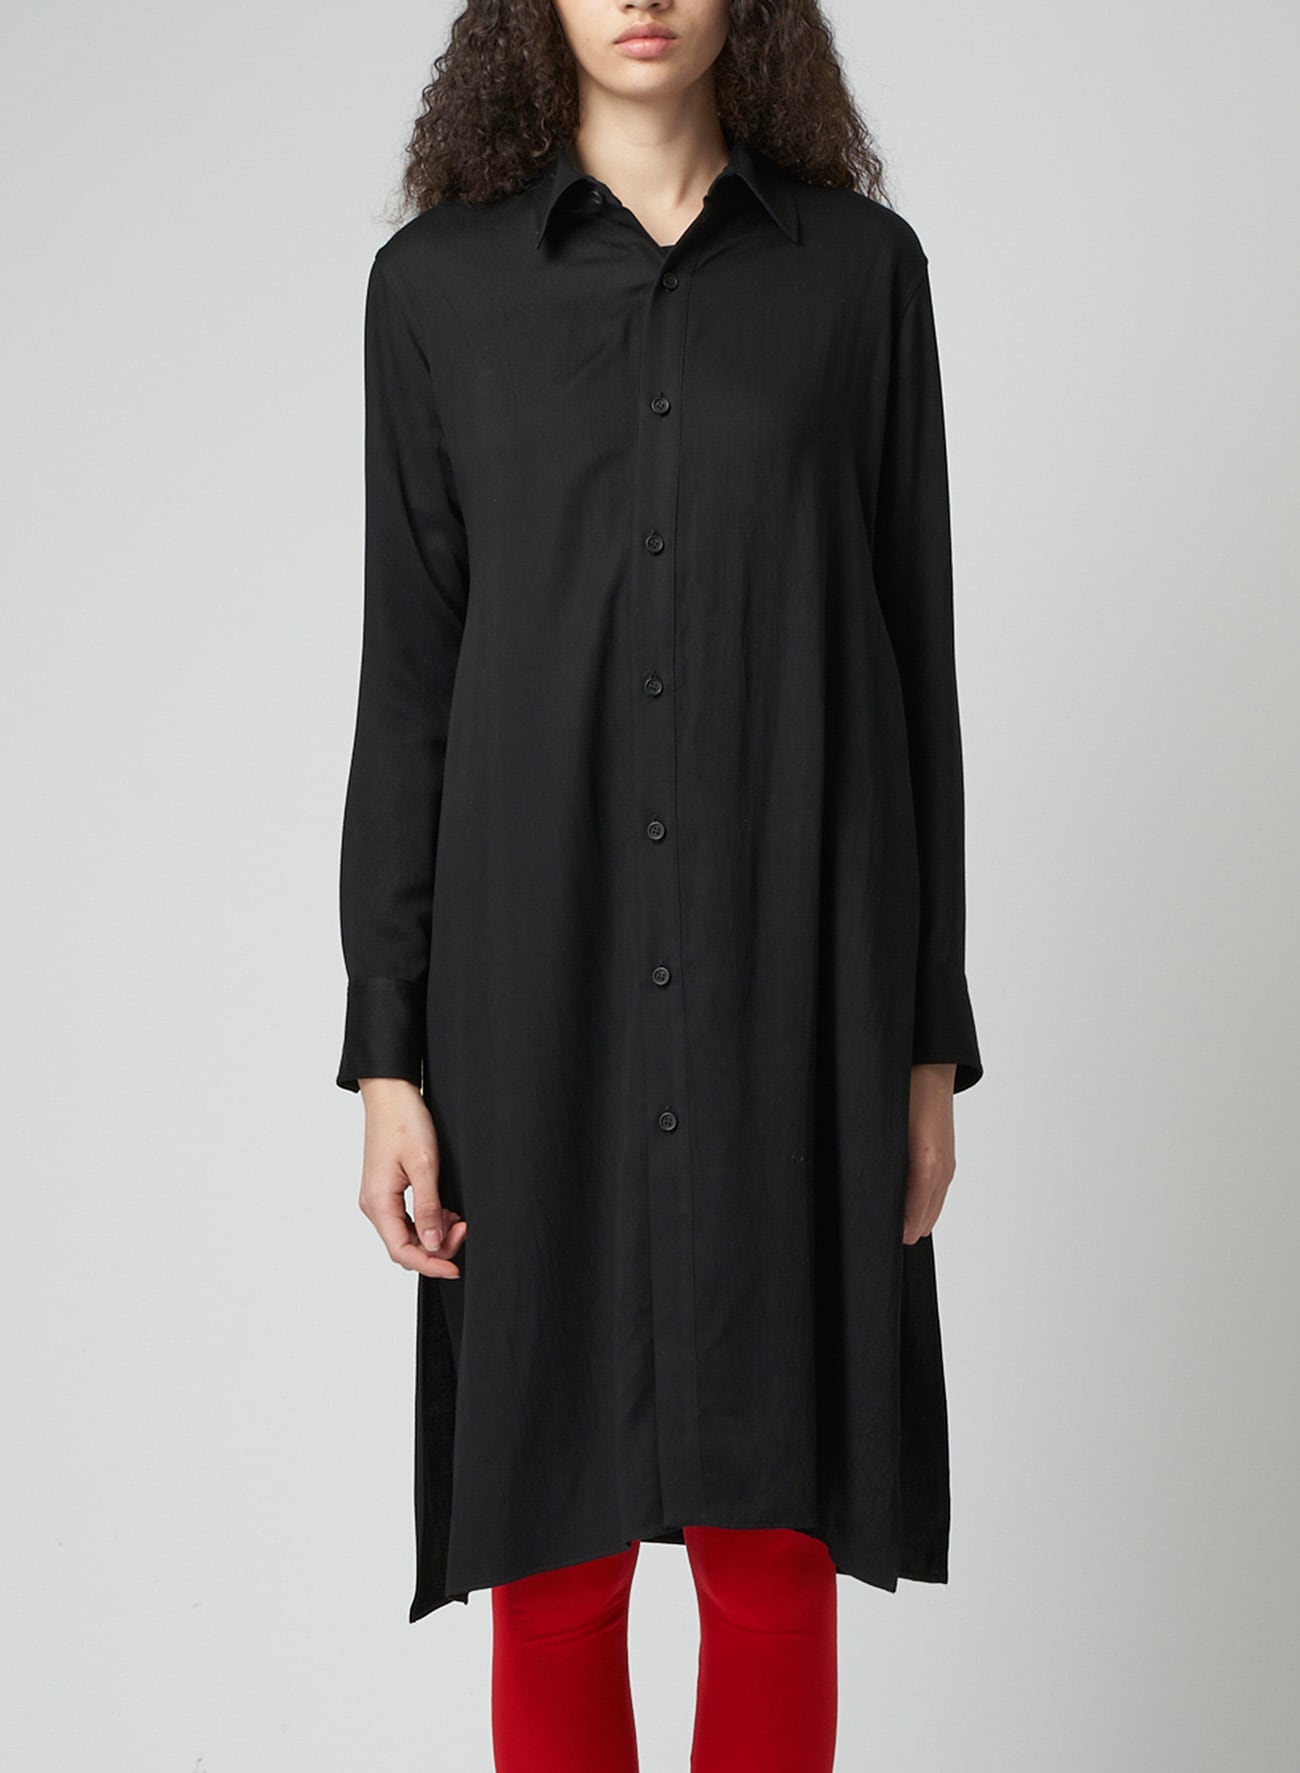 RAYON SATIN LONG SHIRT WITH SIDE SLITS(XS Black): Vintage 1.1｜THE 